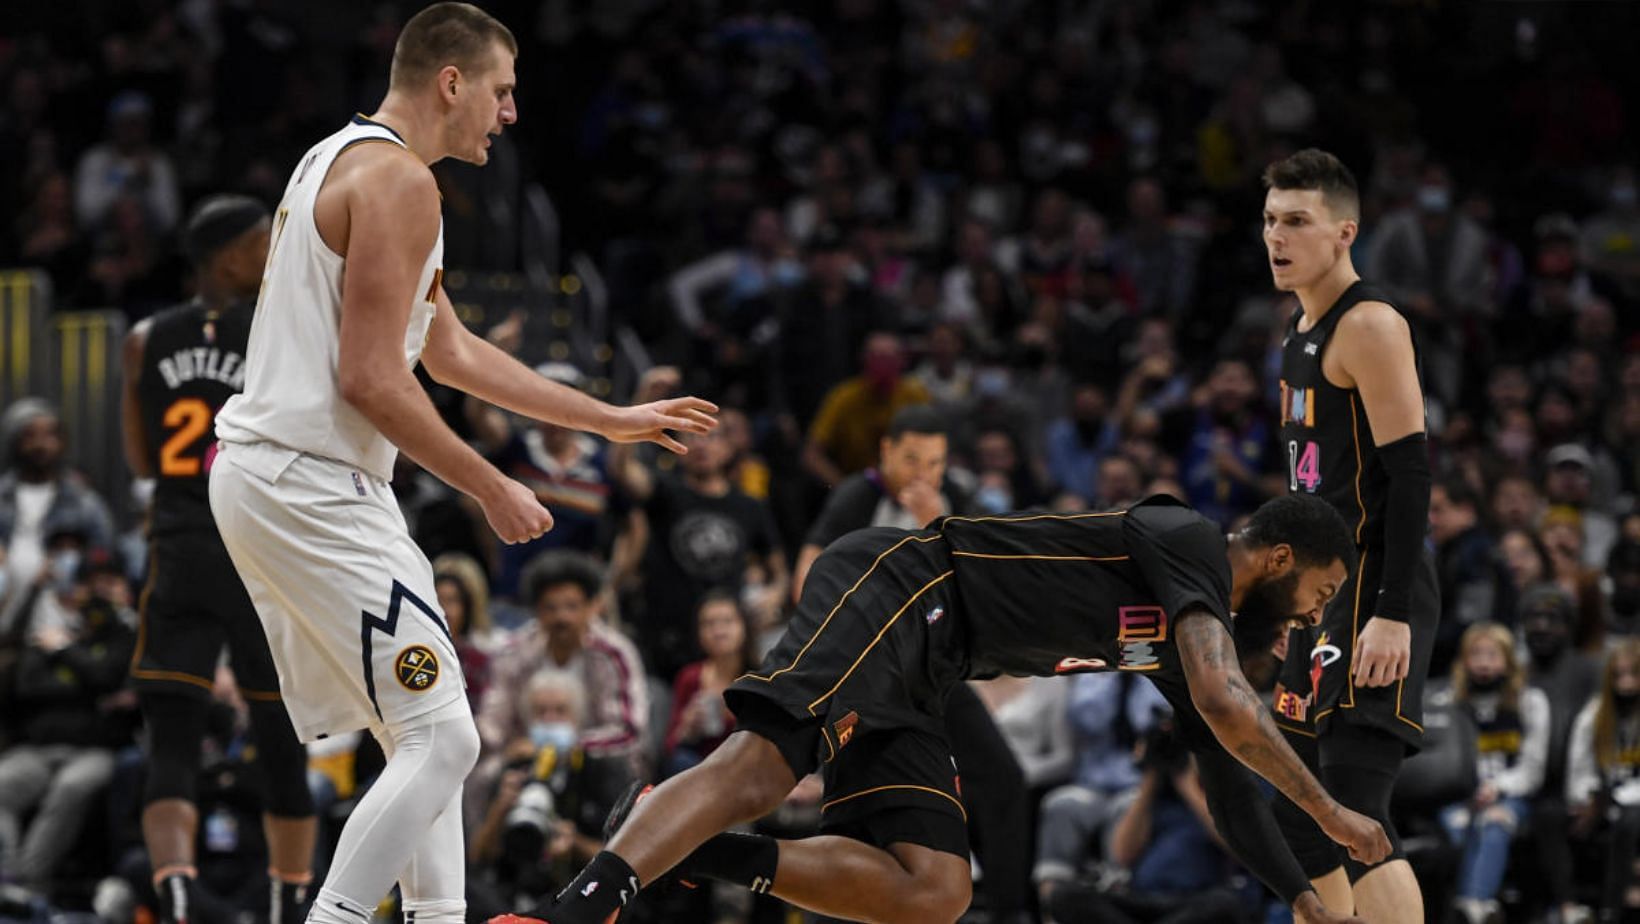 Two-time NBA MVP Nikola Jokic once slammed Markieff Morris after &quot;The Joker&quot; was hit in the ribs by the former Miami Heat forward.